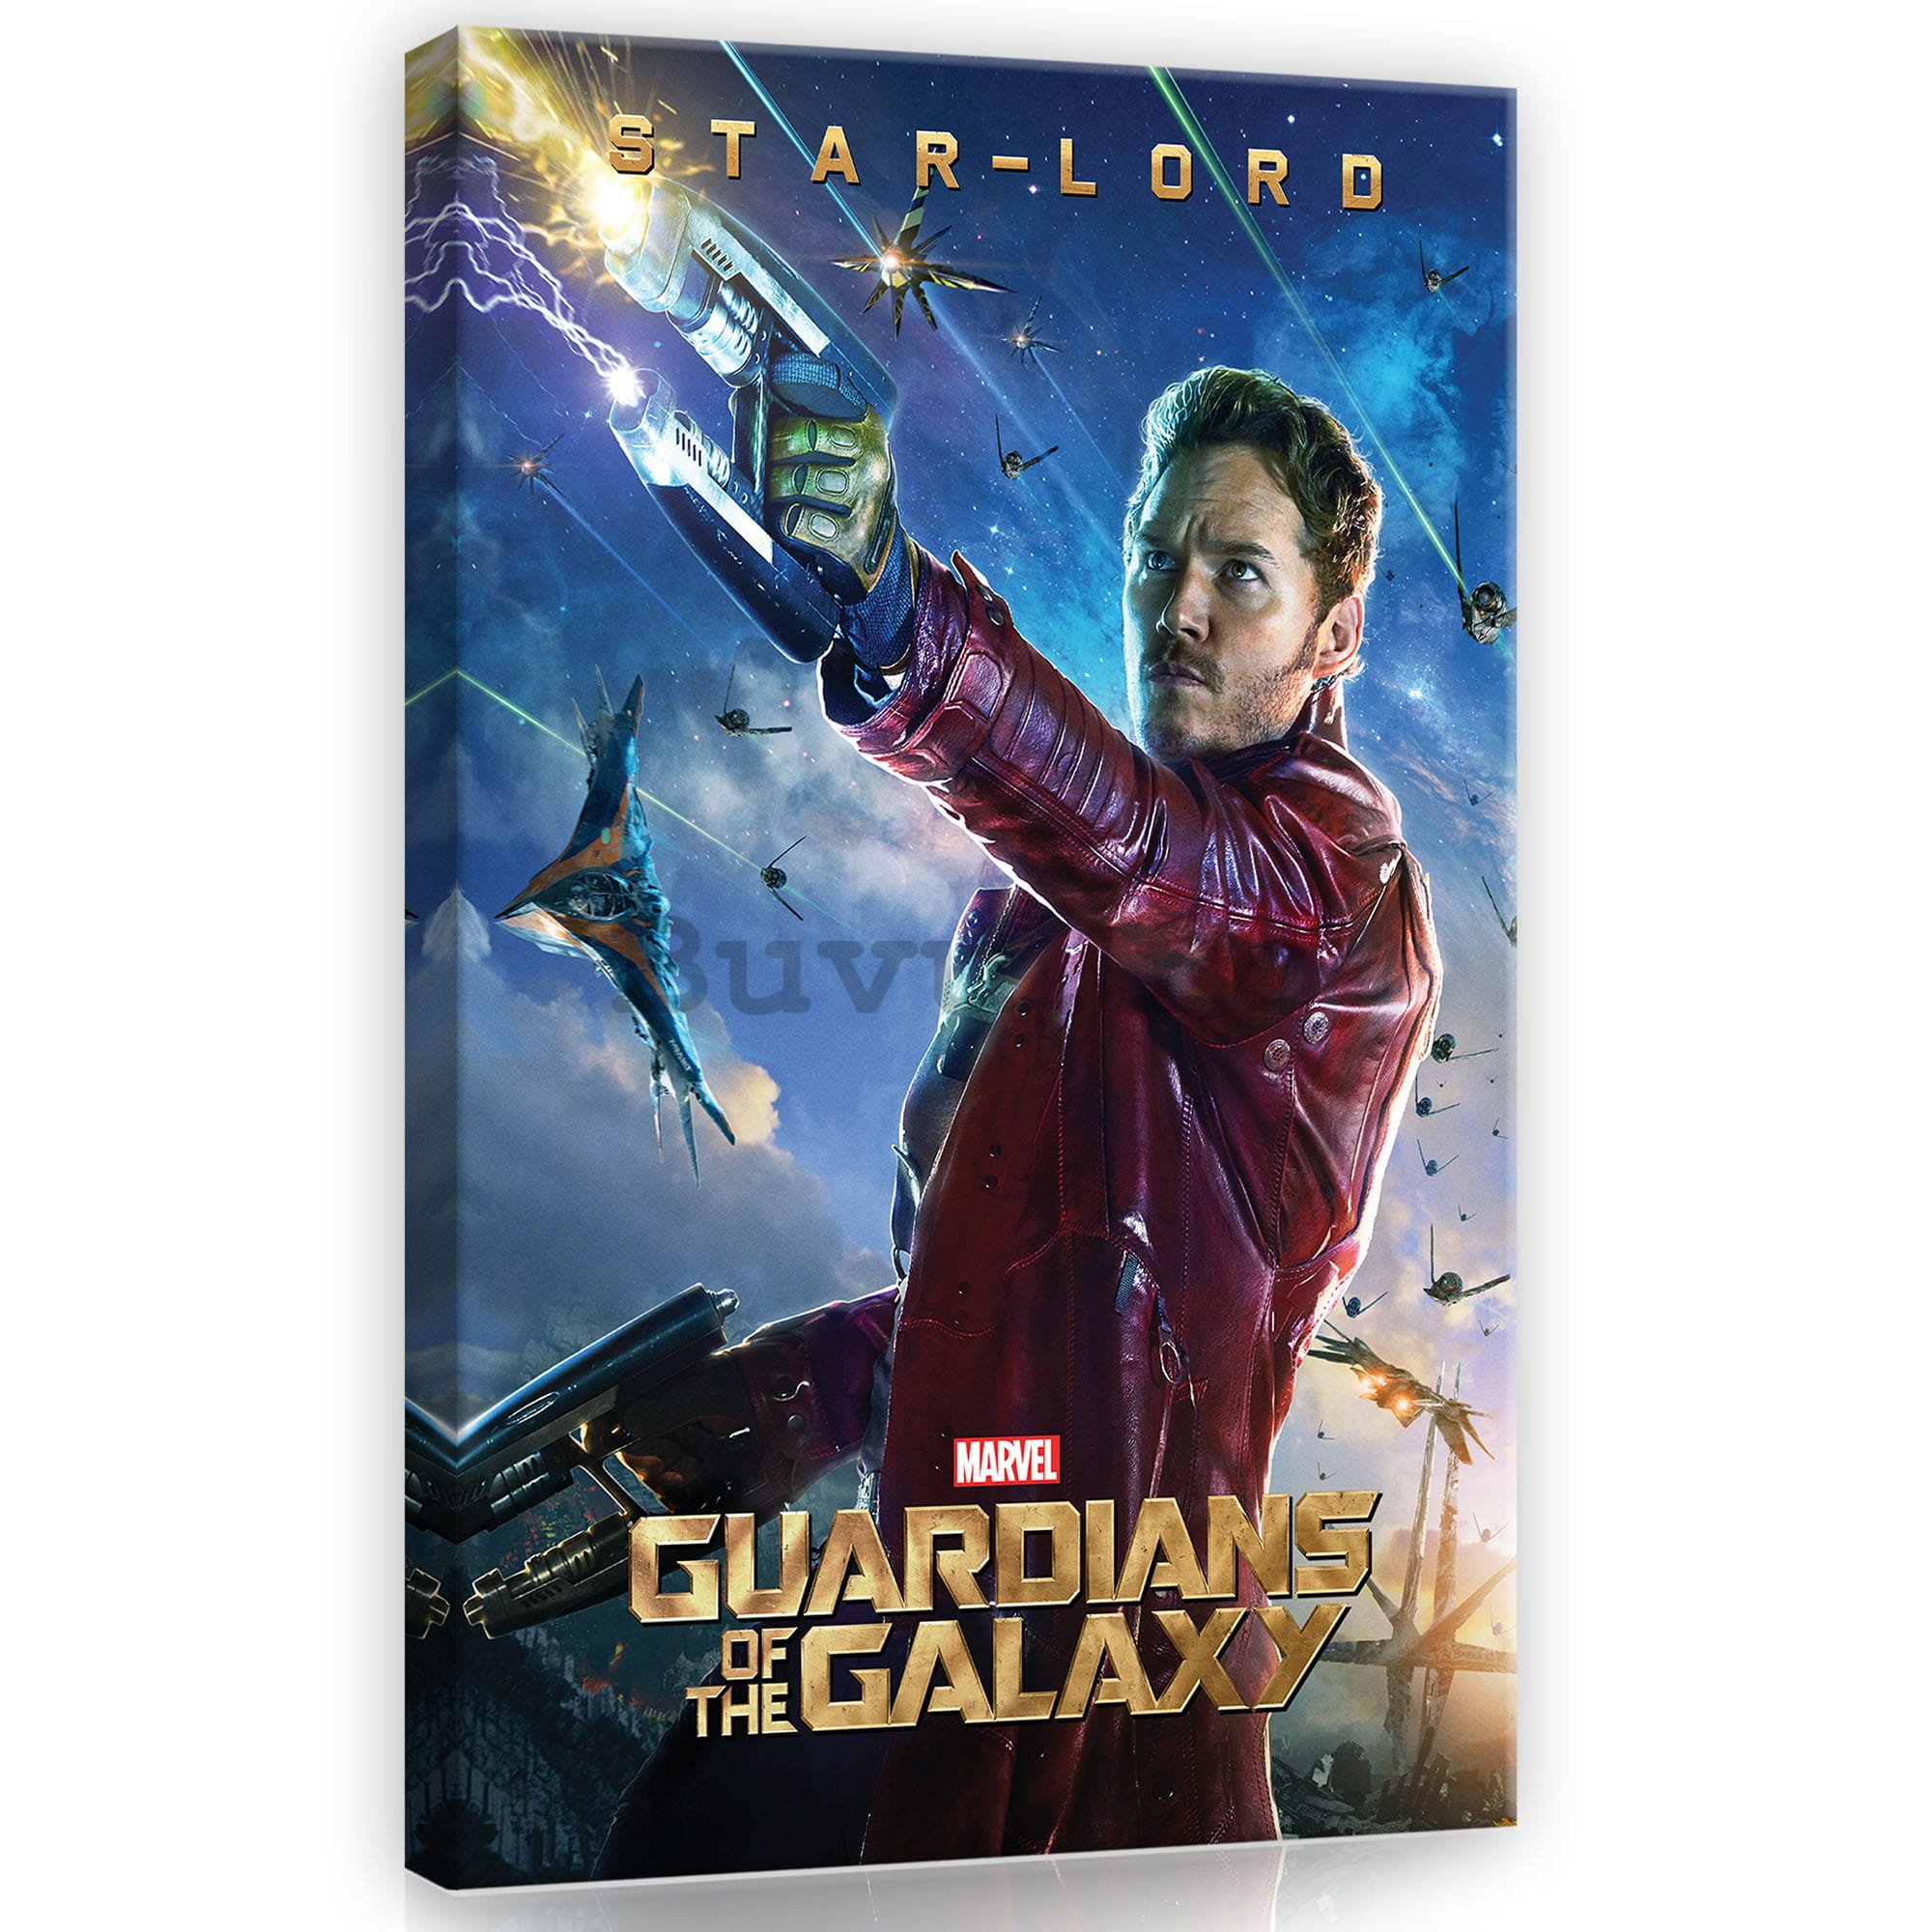 Tablou canvas: Guardians of The Galaxy Star-Lord - 40x60 cm